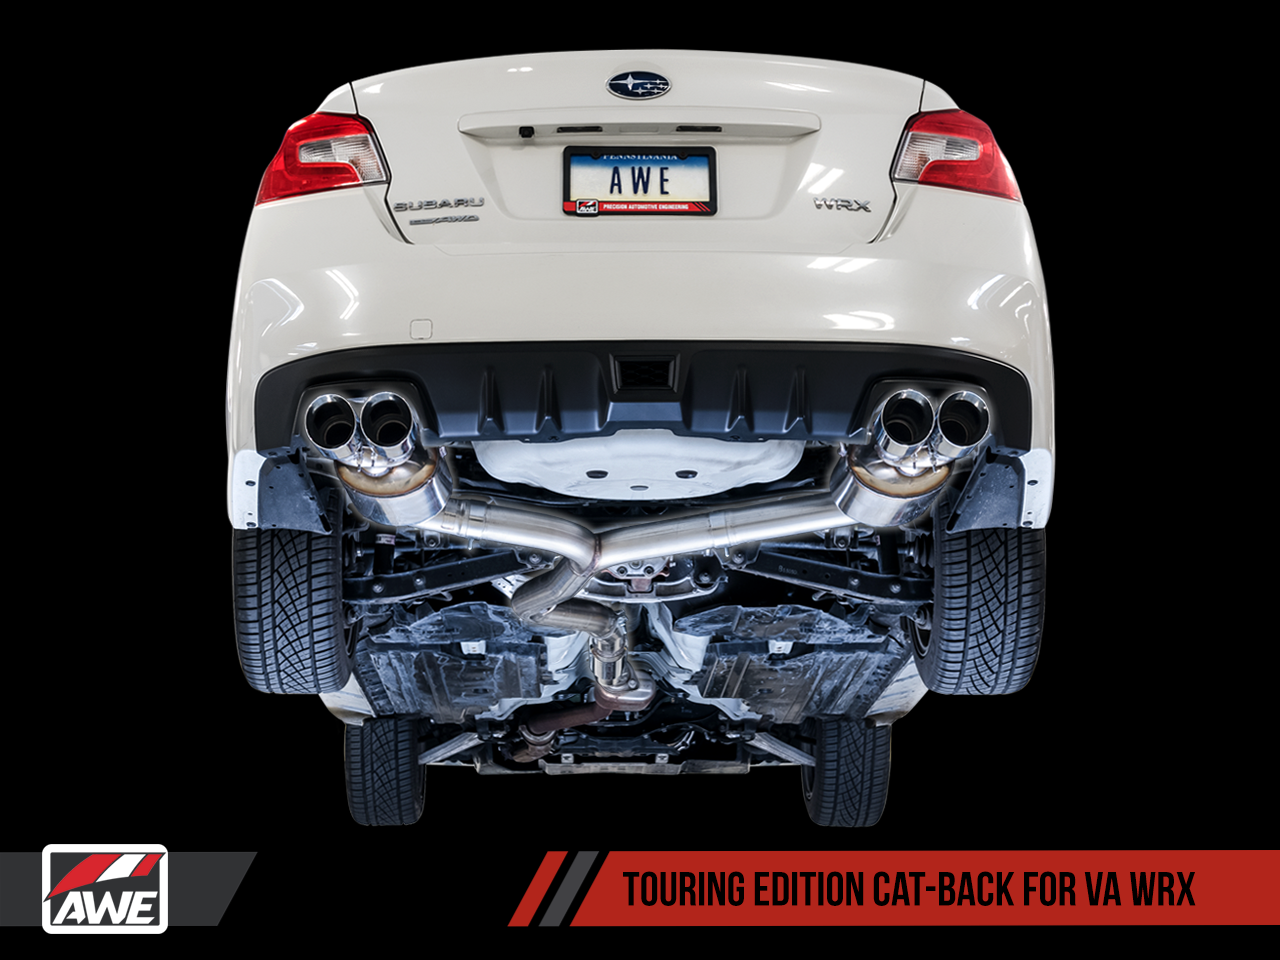  AWE Performance Exhaust Suite for FA20-Equipped WRX